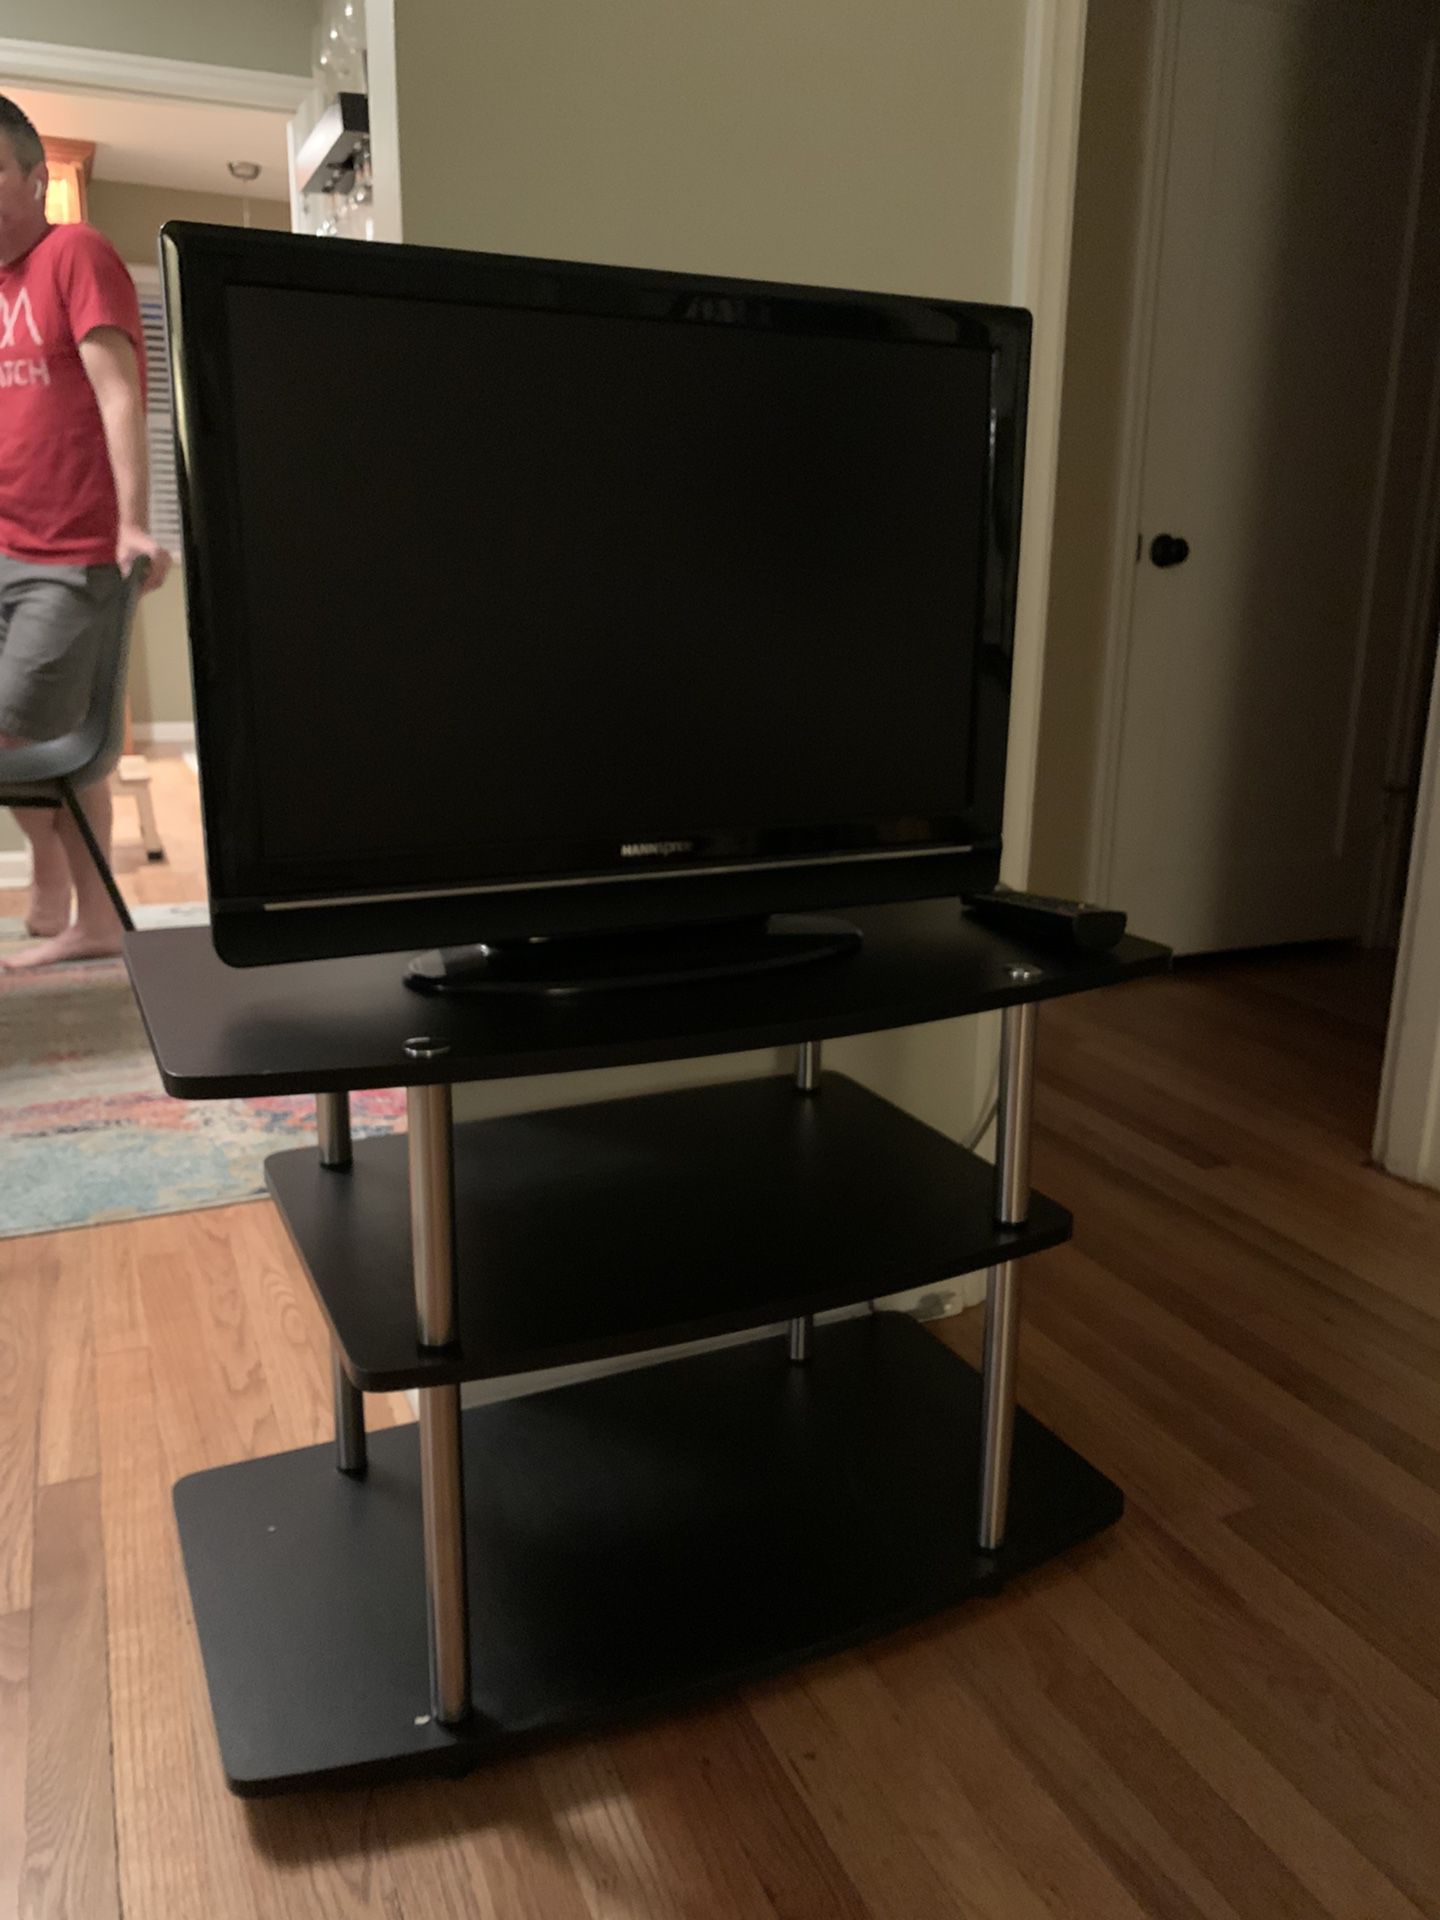 TV Stand NOT THE TV - Repeat, TV NOT INCLUDED 😆